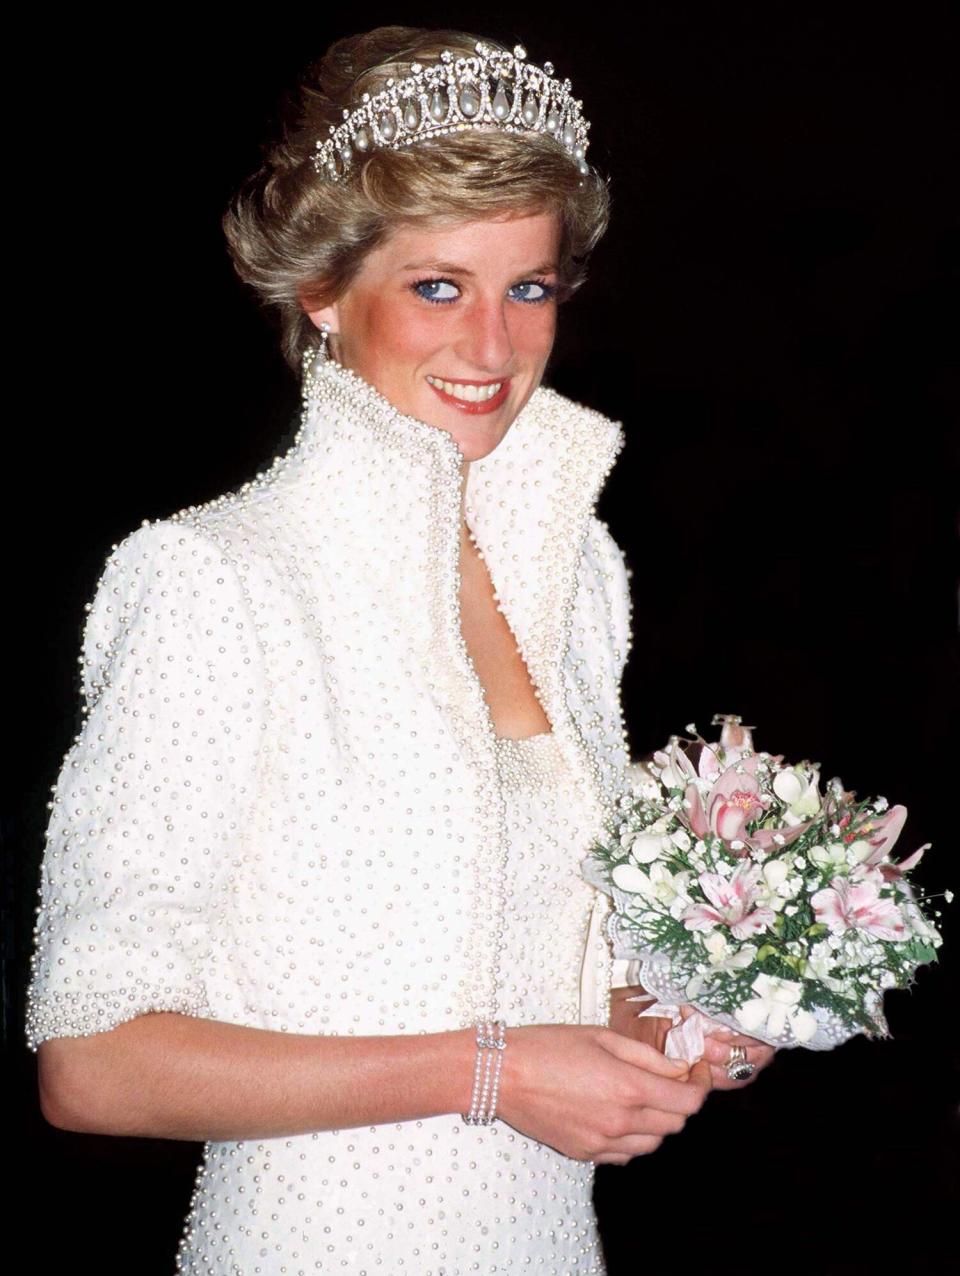 Princess Of Wales In Hong Kong Wearing An Outfit Described As The Elvis Look Designed By Fashion Designer Catherine Walker